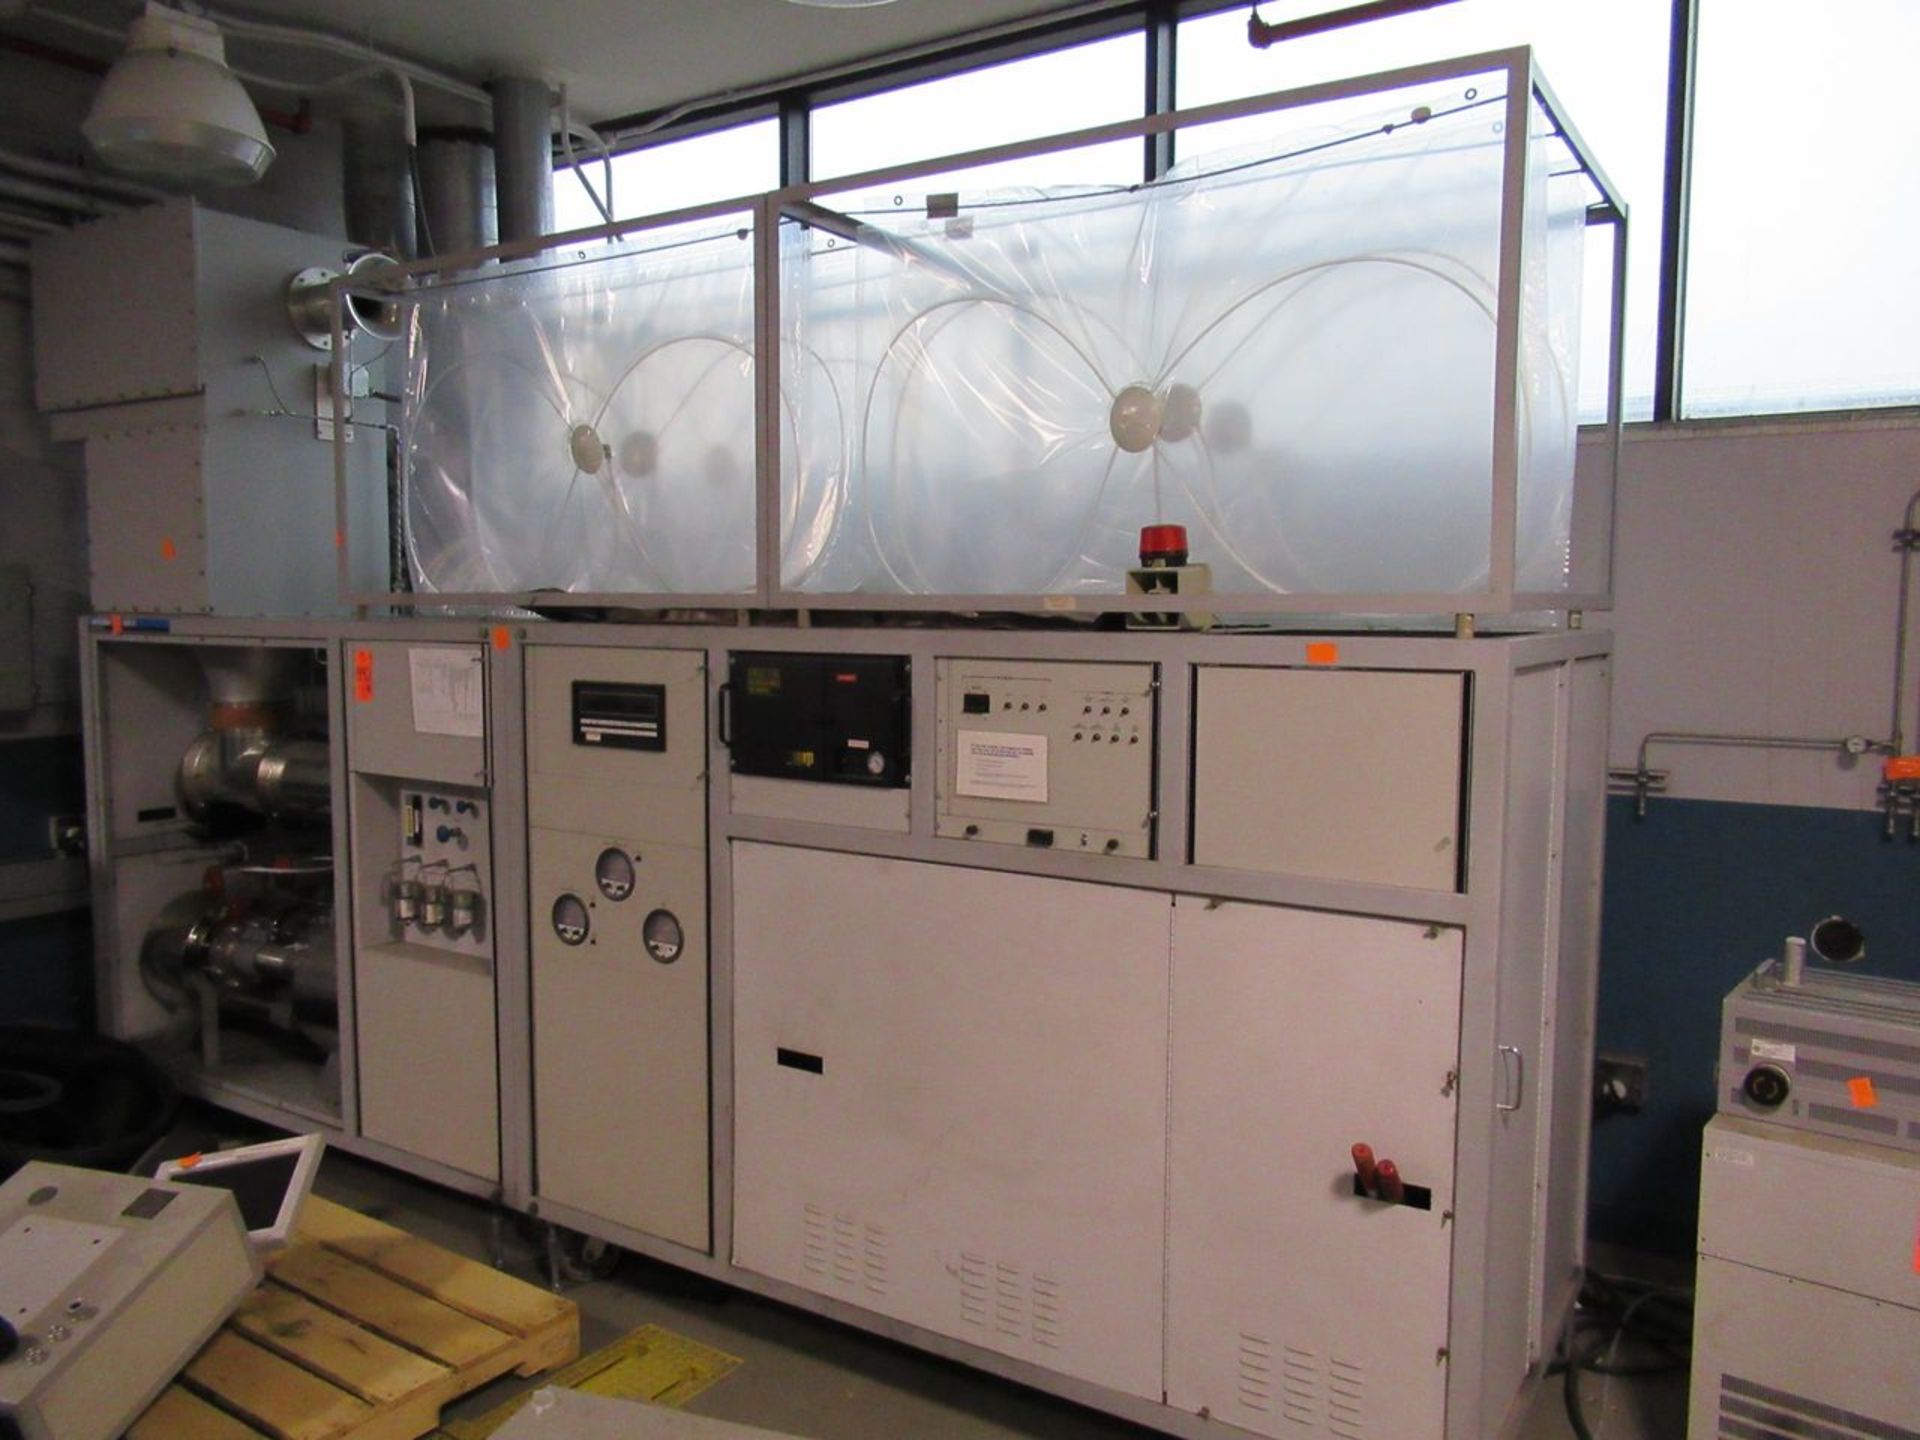 Horiba CFV-DPS-88 Diesel Particulate System, s/n A-371 with Bulk Stream, Sample Venturi and CFV